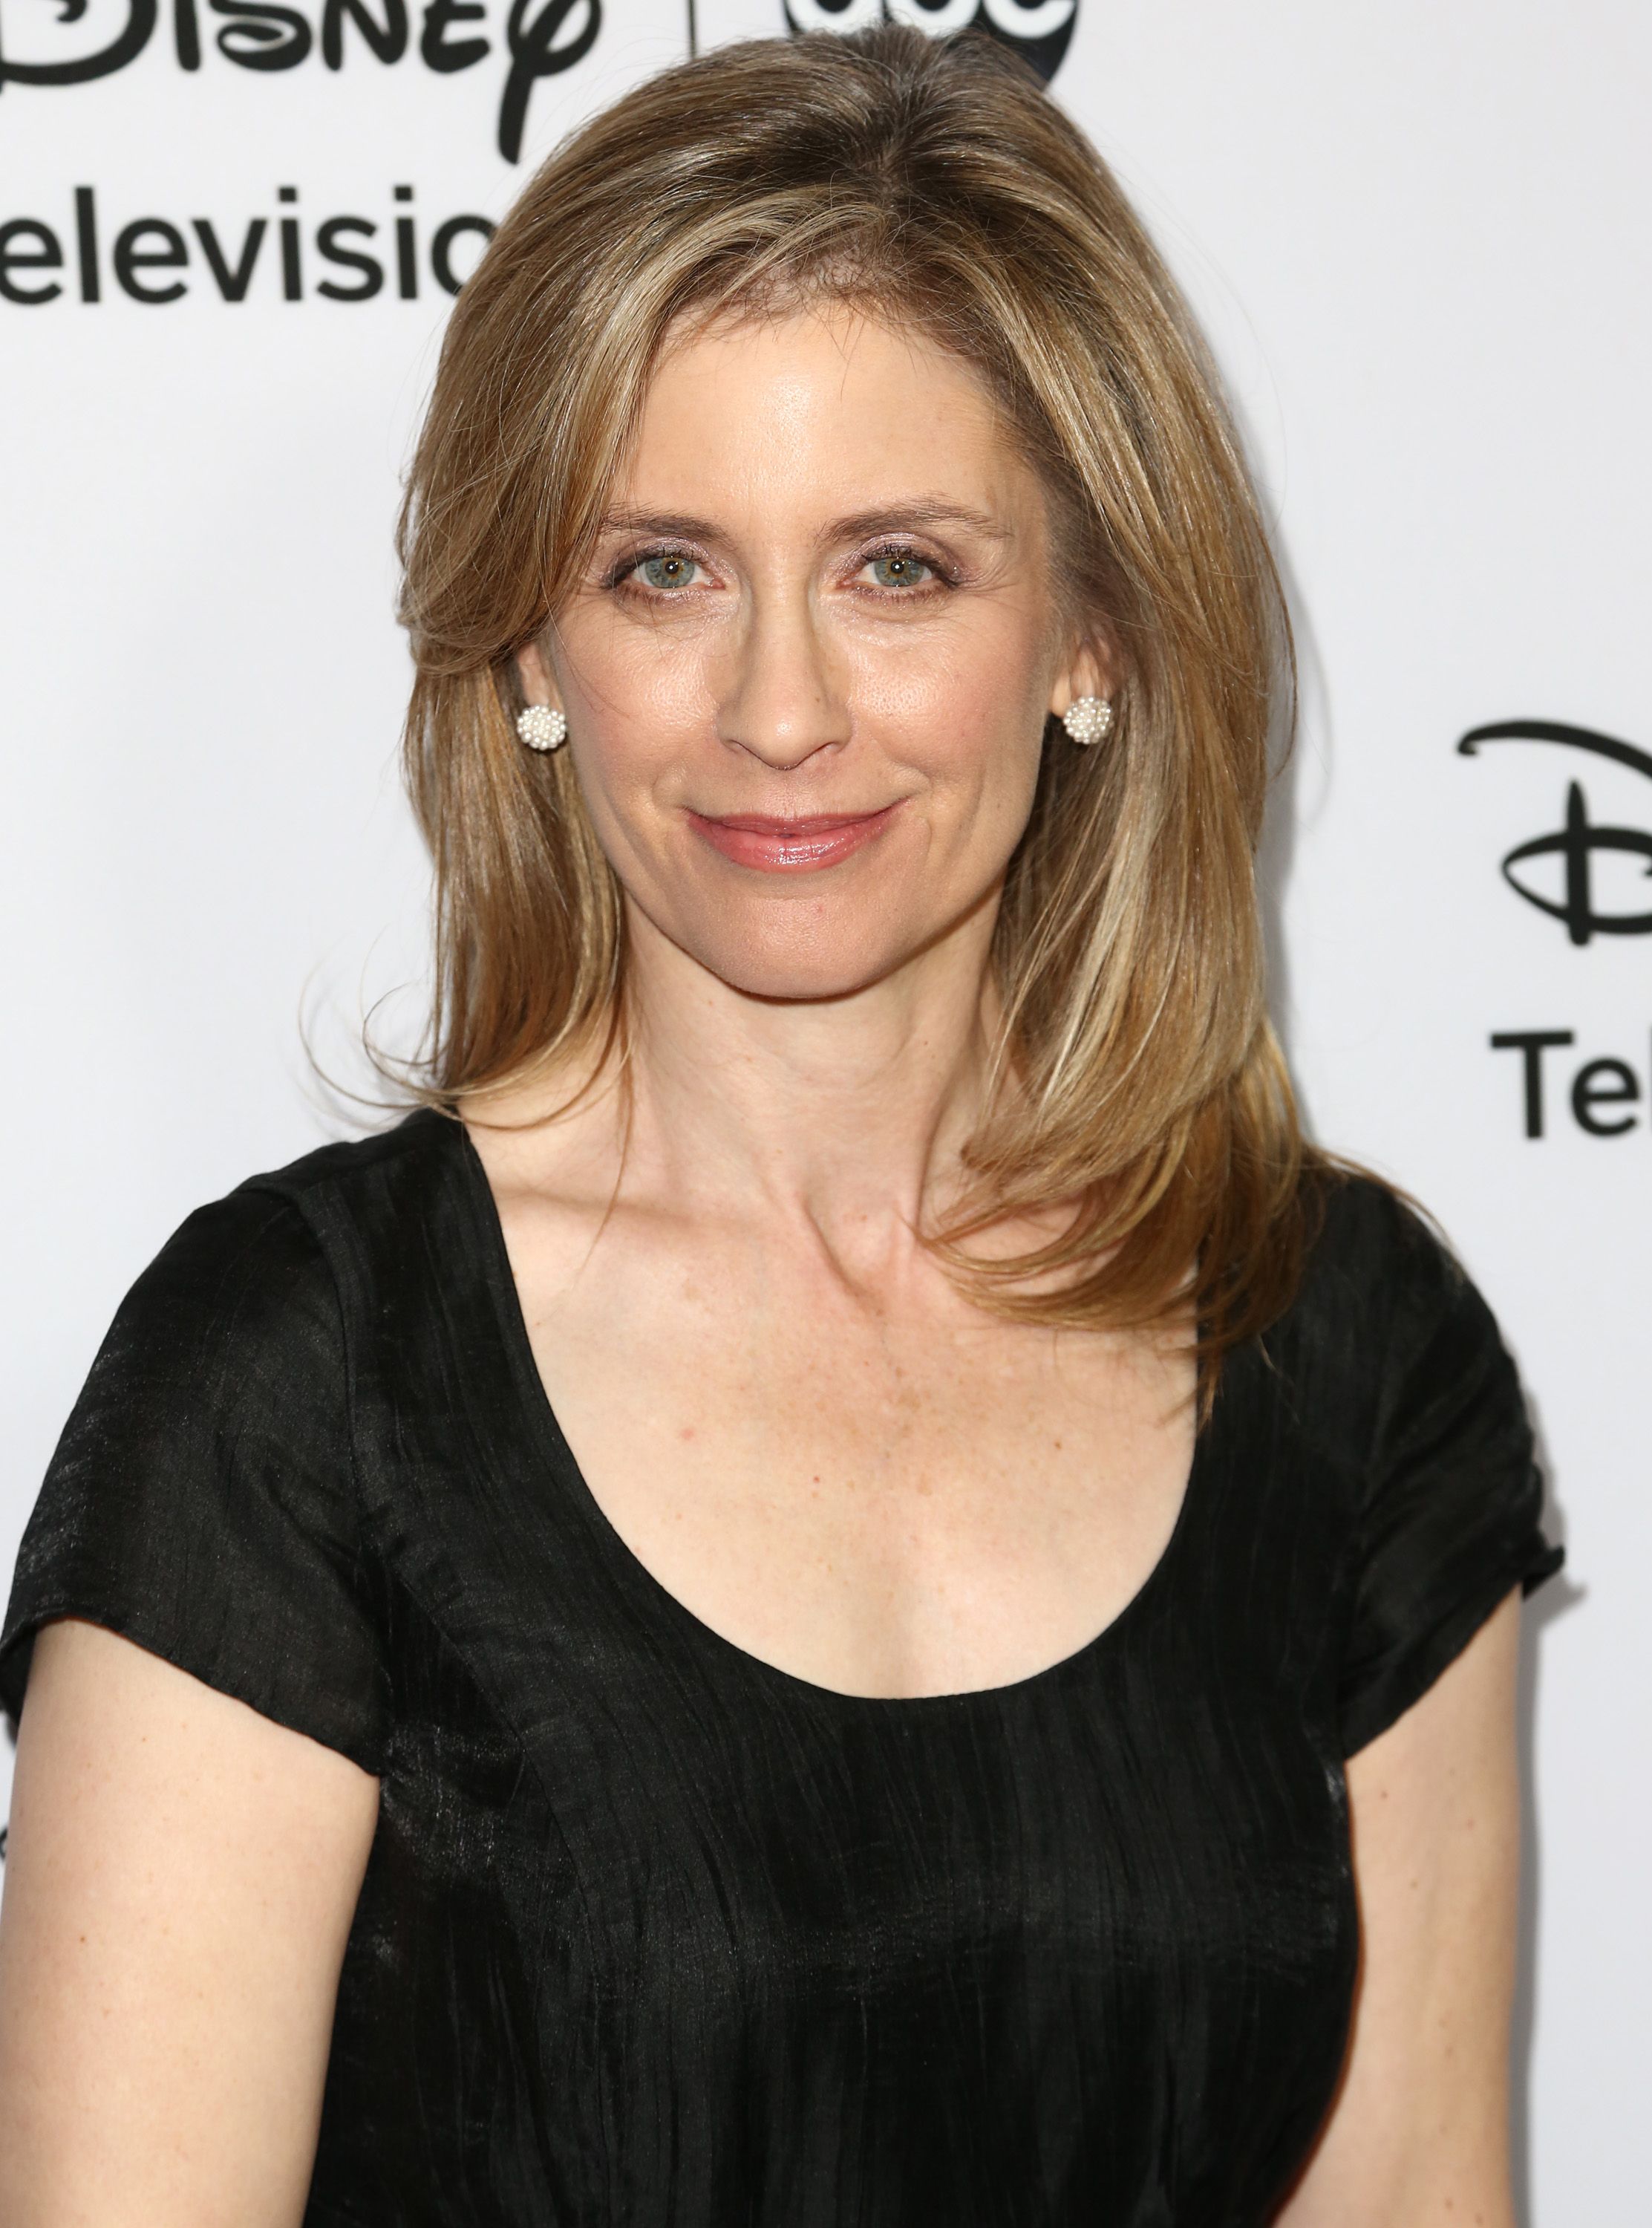 Pictures of Helen Slater.